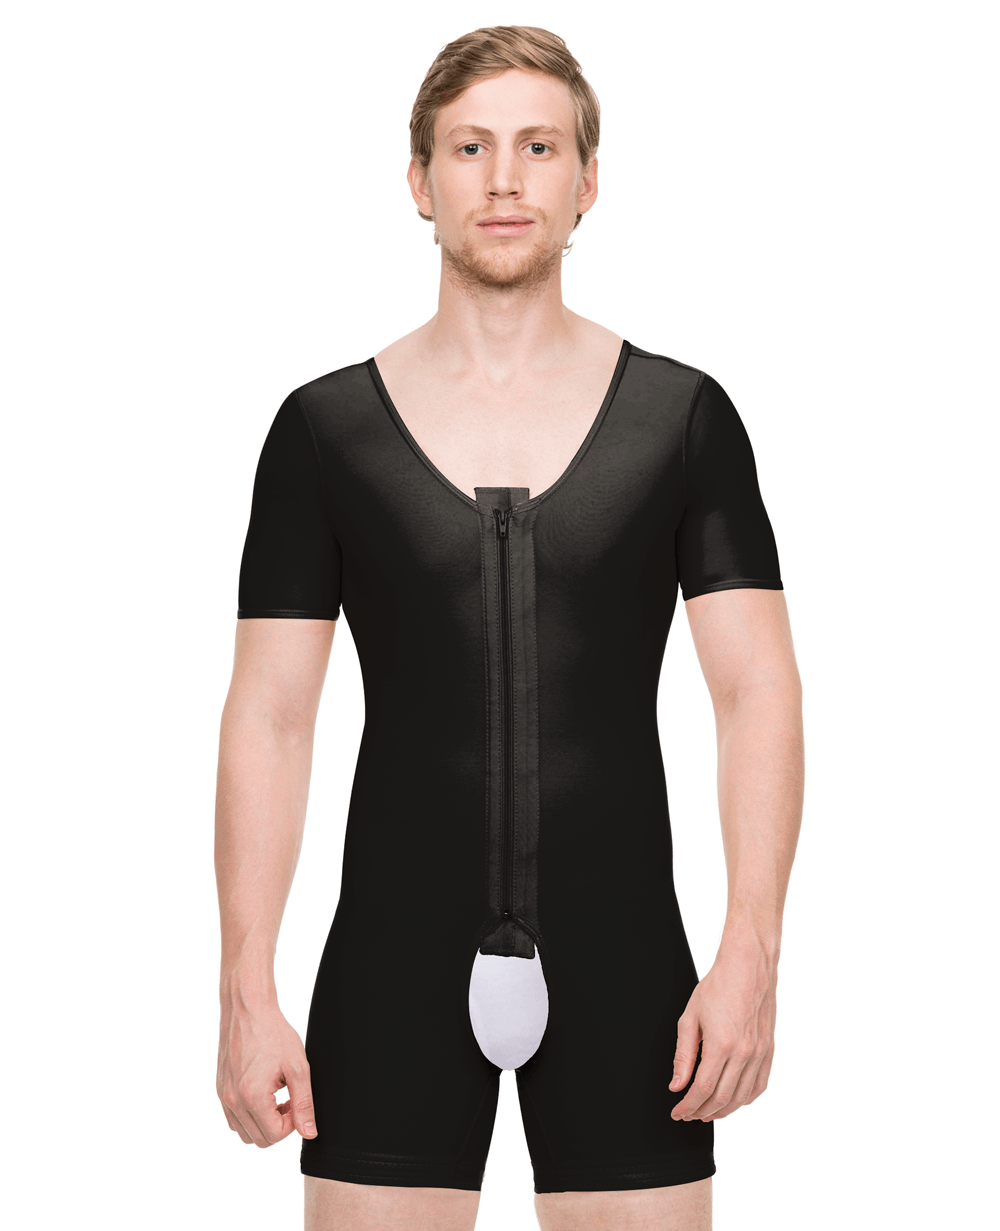 Isavela Stage 1 Compression Body Suit with Bra - Mid-Thigh